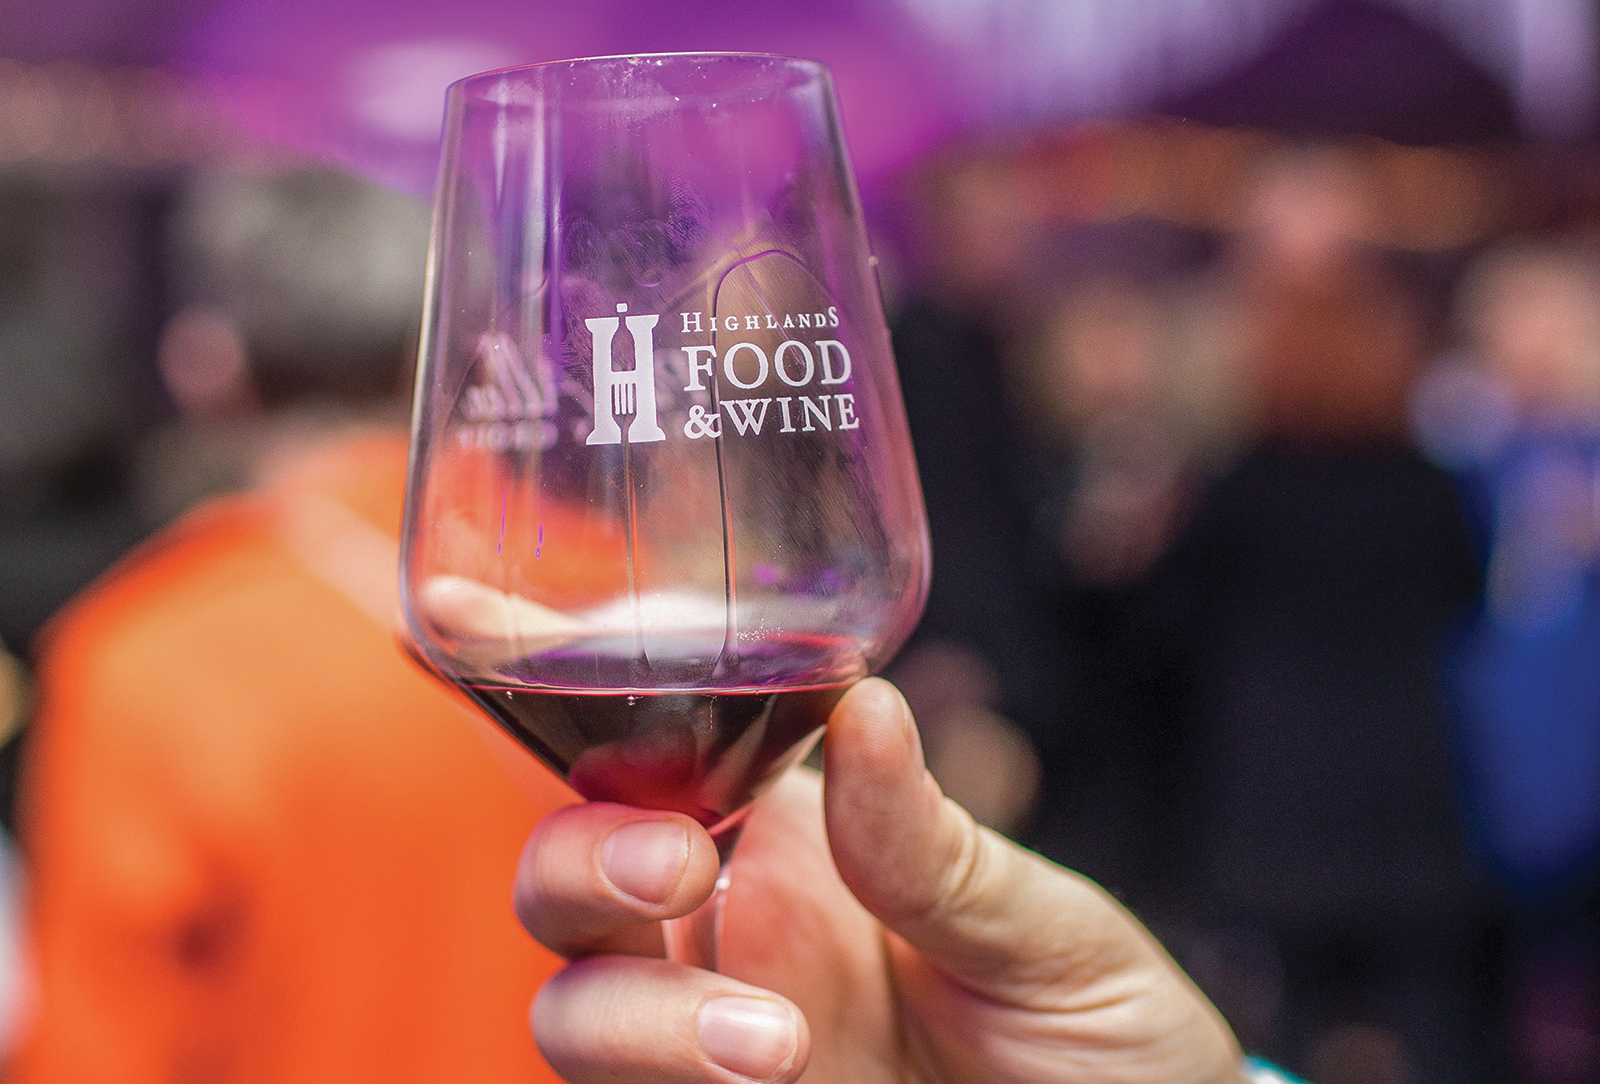 highlands-food-and-wine-glass-nc